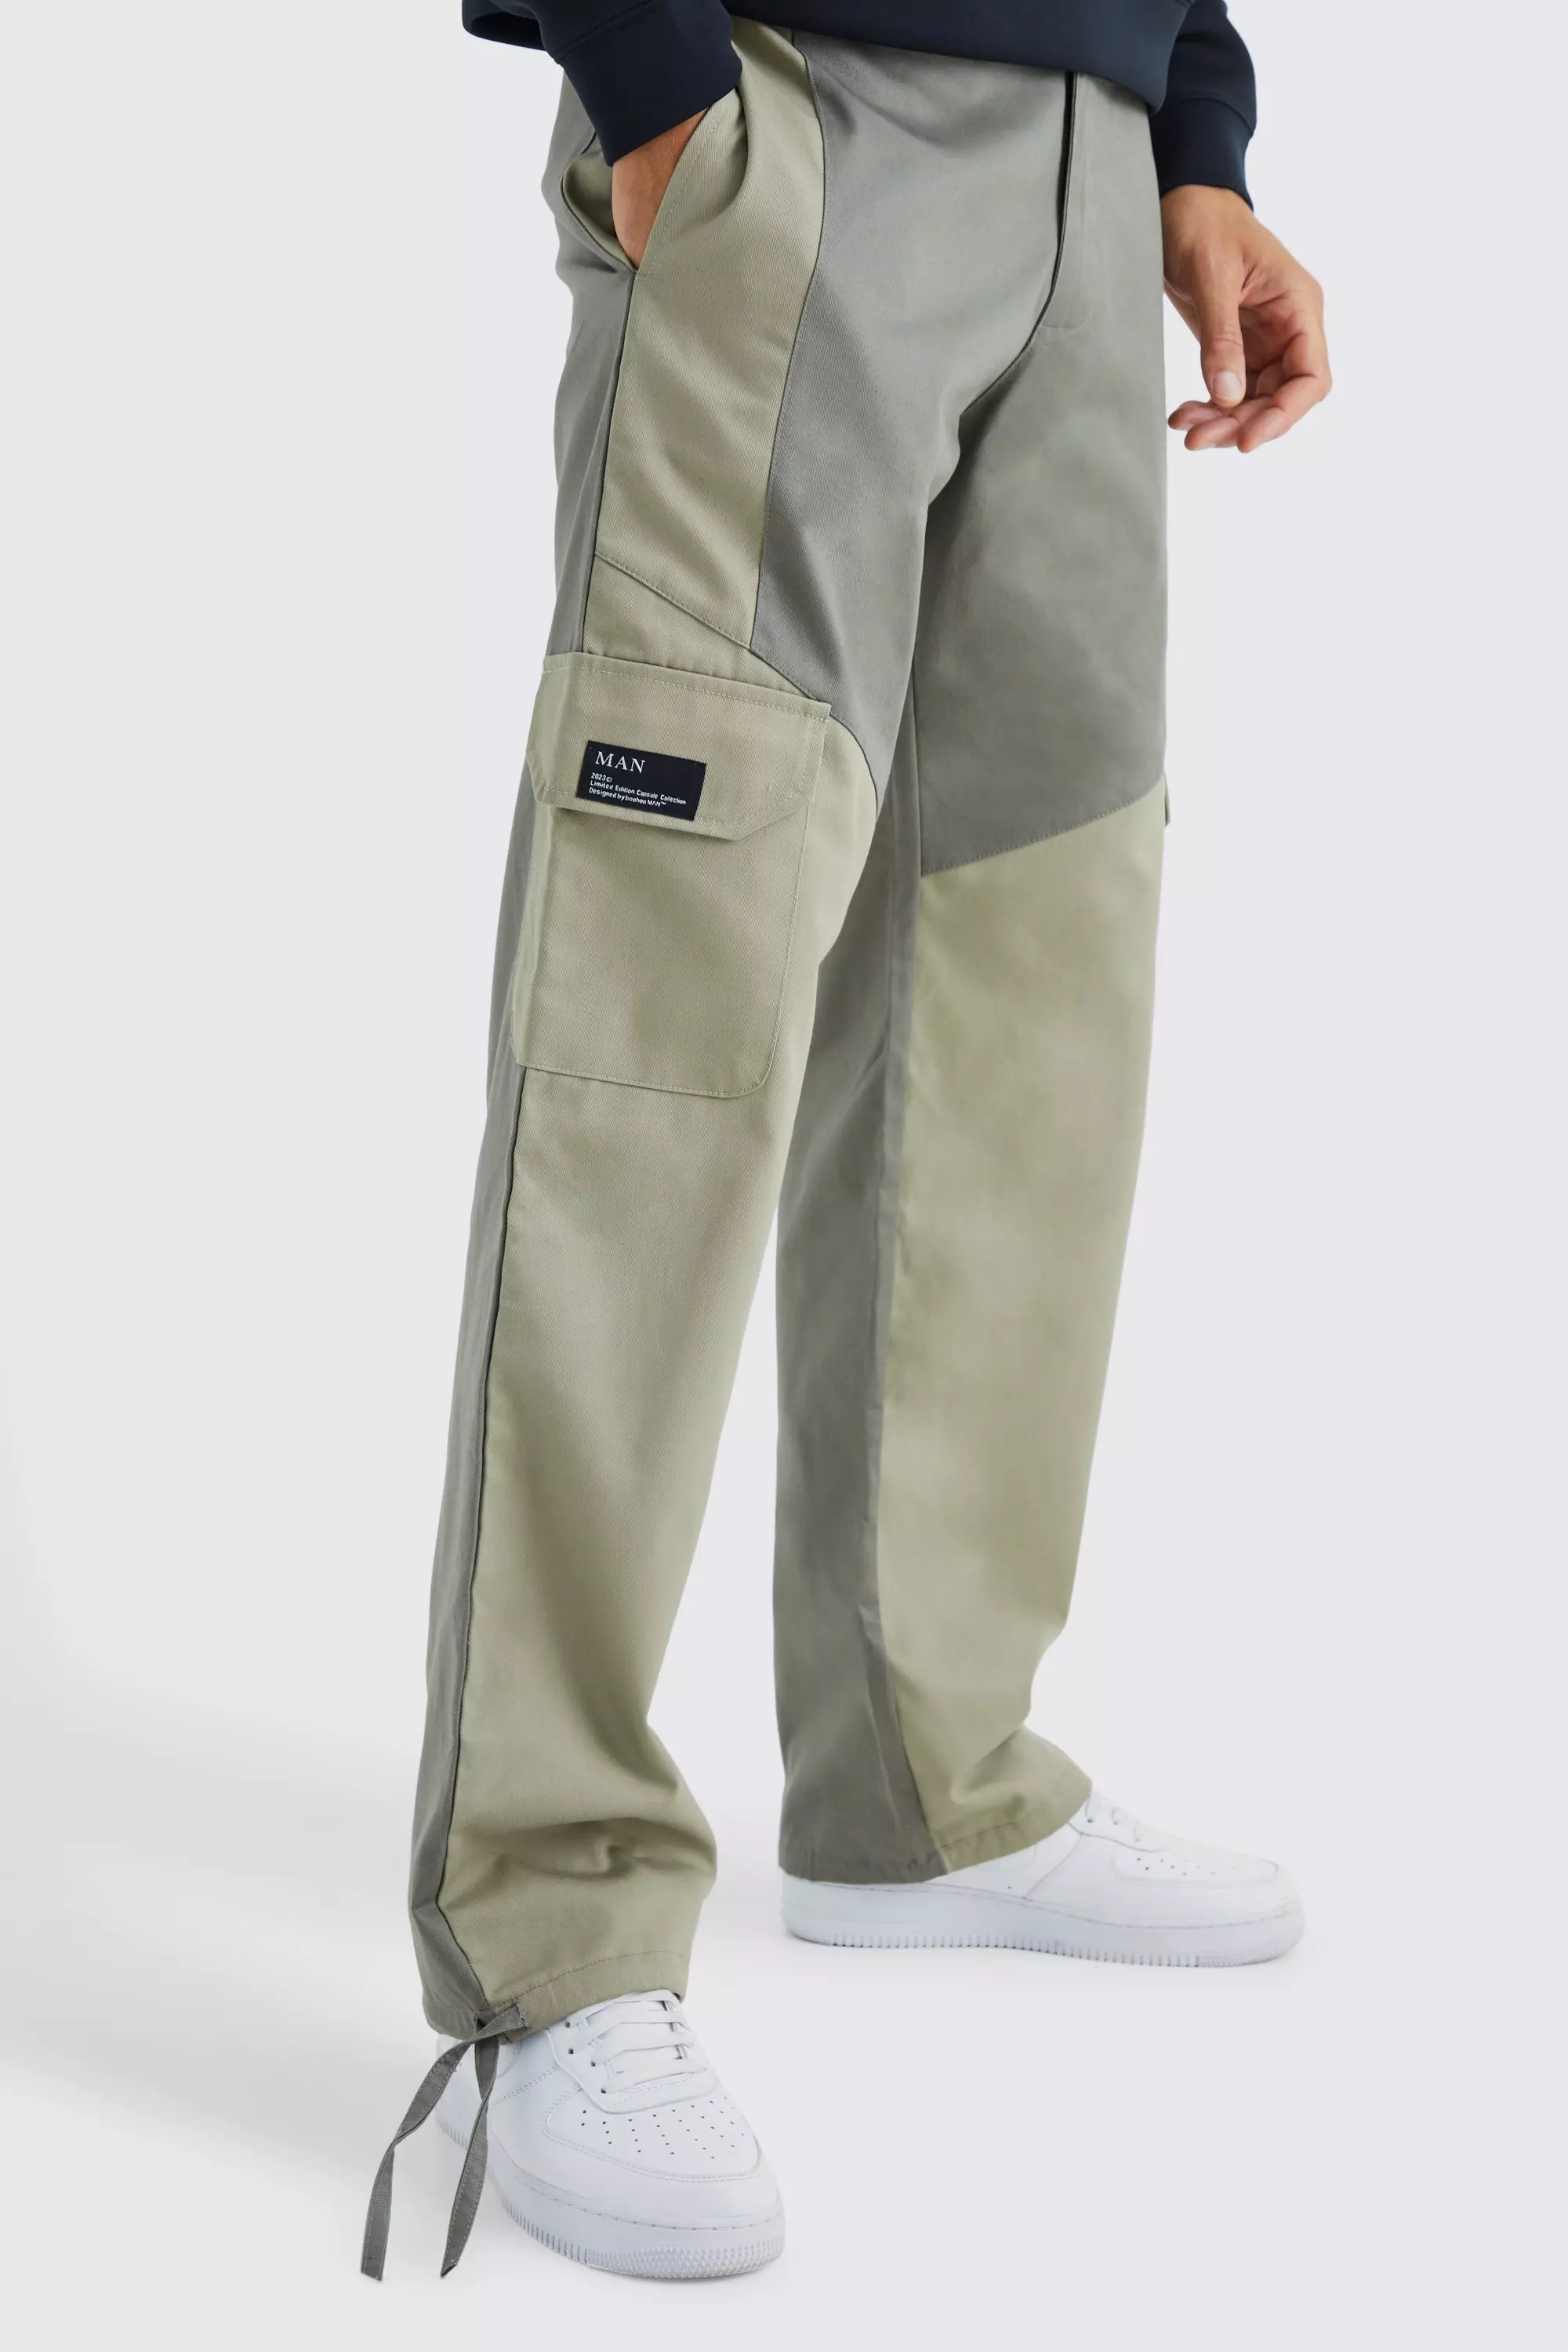 Tall Slim Fit Colour Block Cargo Pants With Woven Tab Khaki